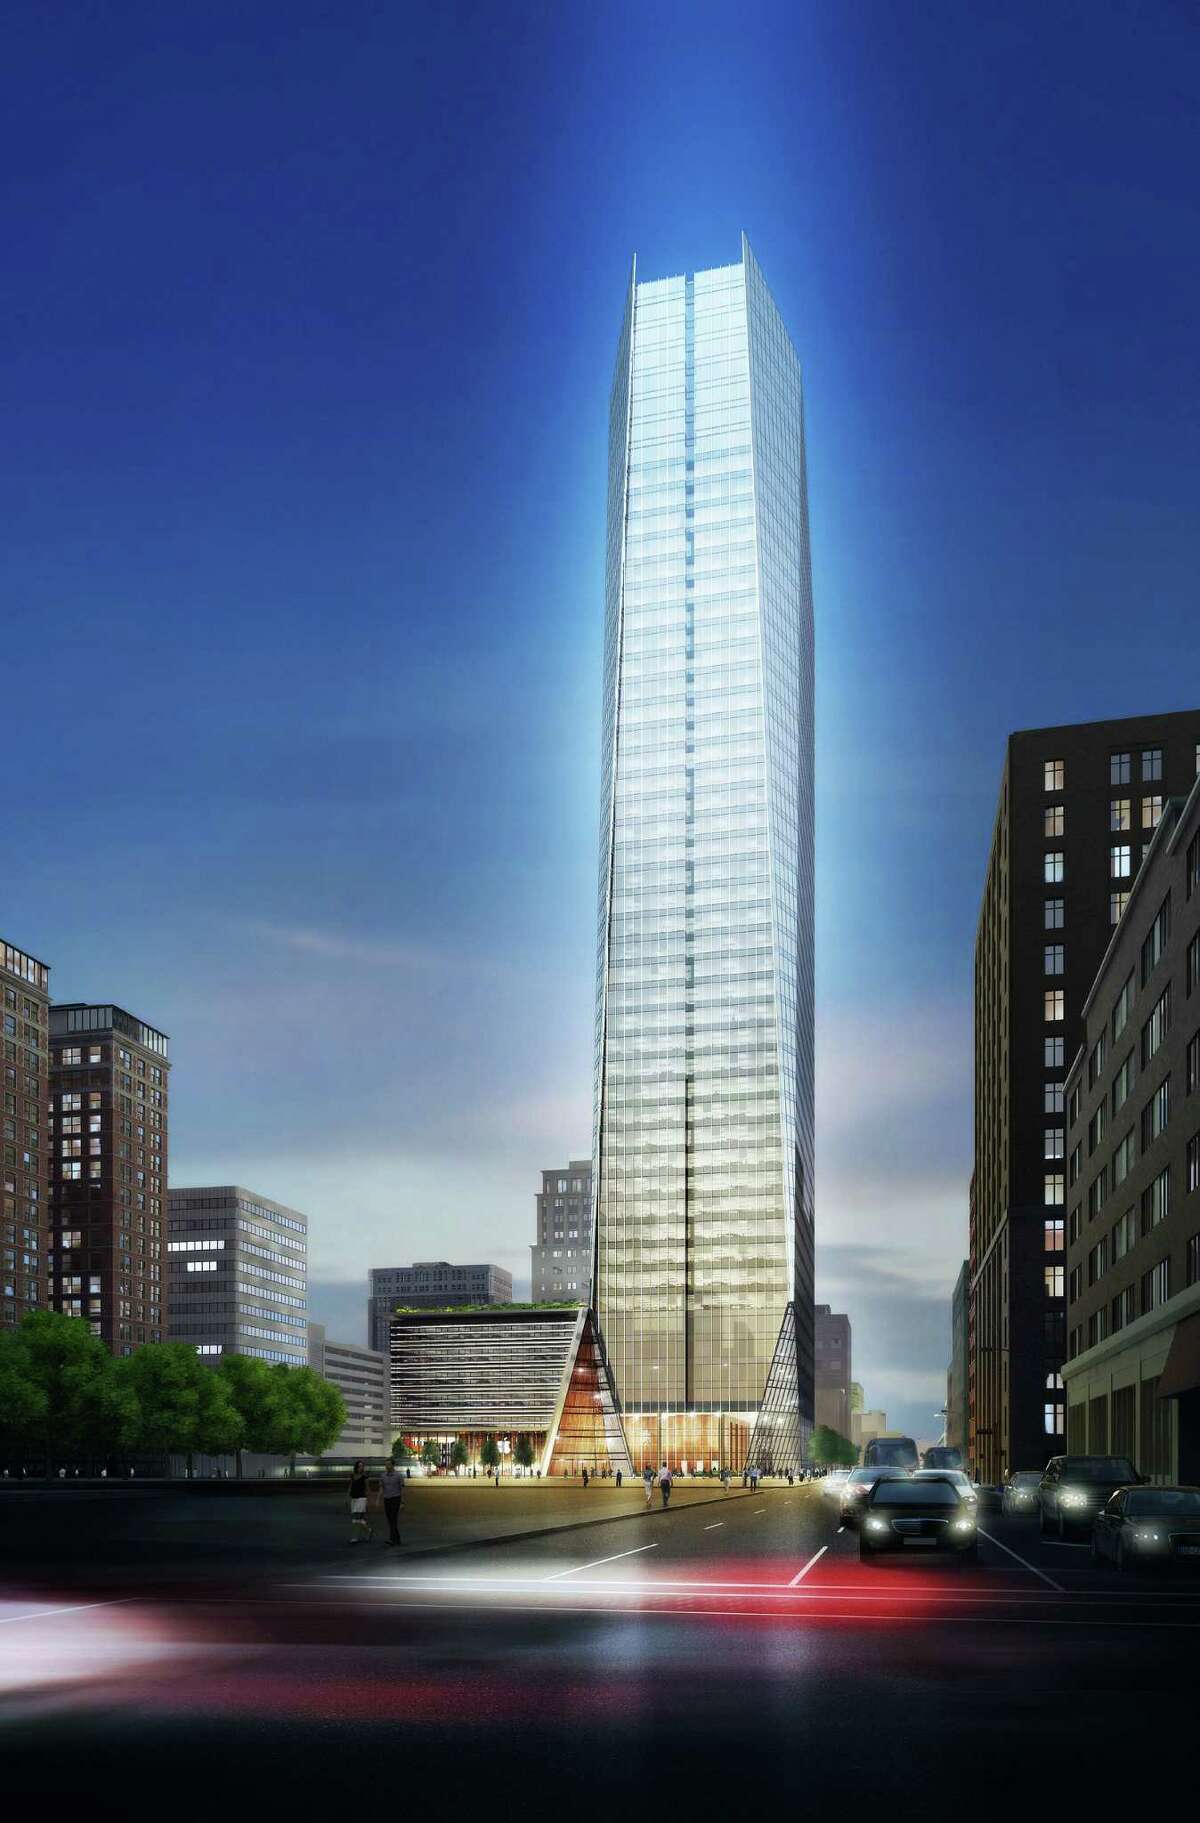 A rendering of the proposed 41-floor office tower to be built at 609 Main and Texas by Hines.